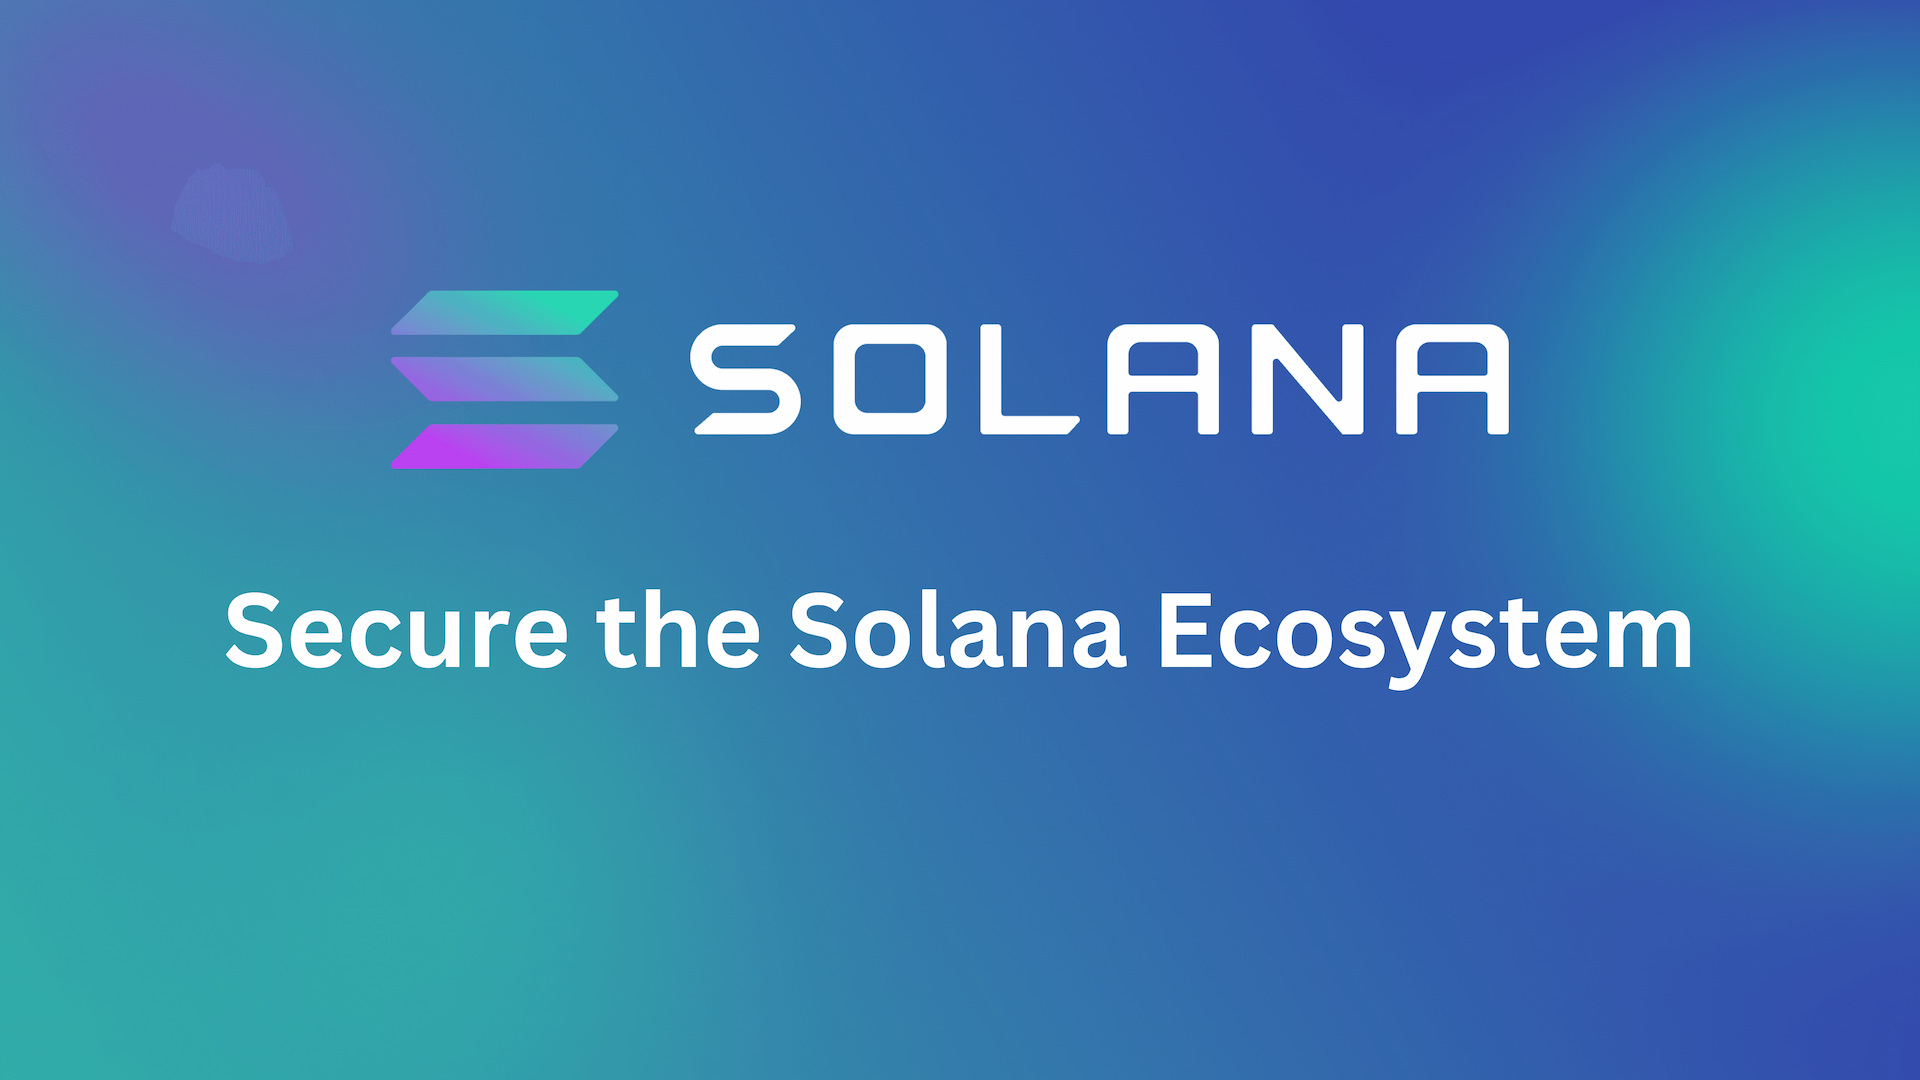 Lead in: Secure the Solana Ecosystem